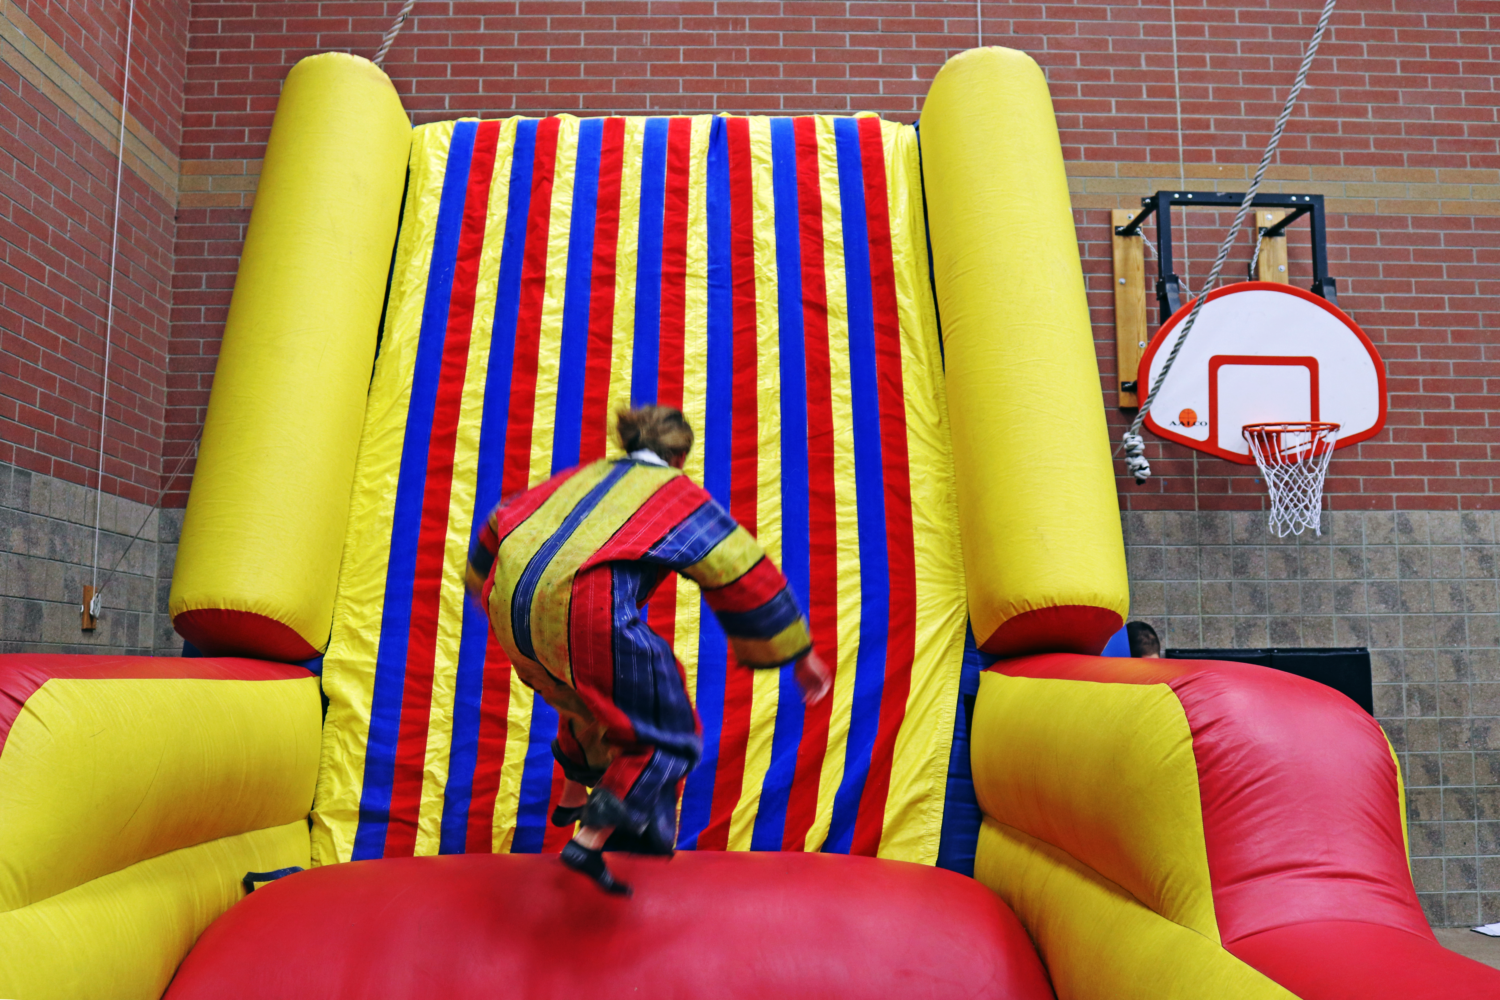 Ryan Chance on inflatable Velcro wall] - The Portal to Texas History